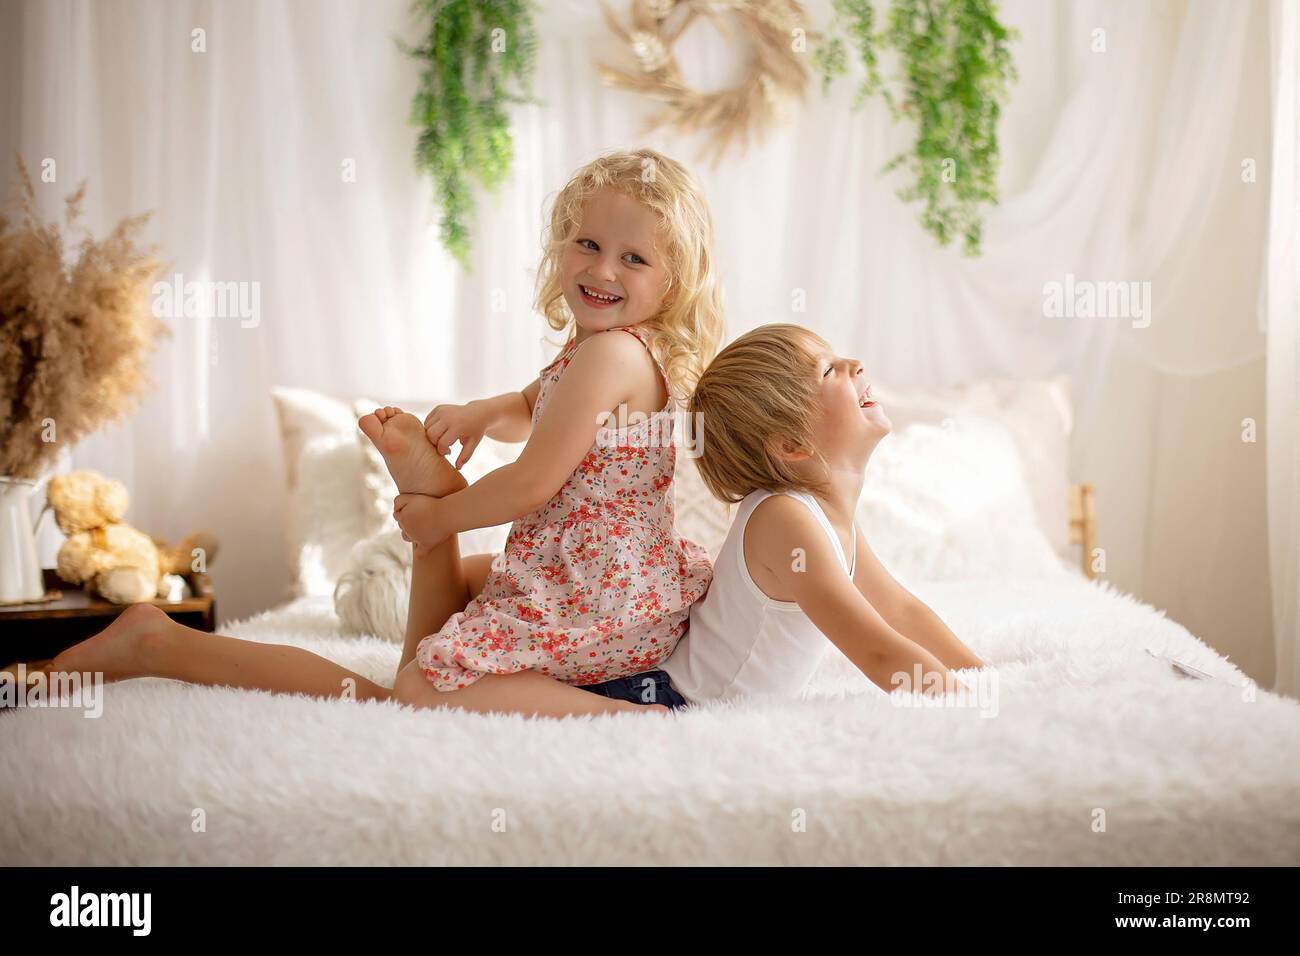 Cute sweet toddler children, tickling feet on the bed, laughing and smiling, childish mischief, happiness Stock Photo